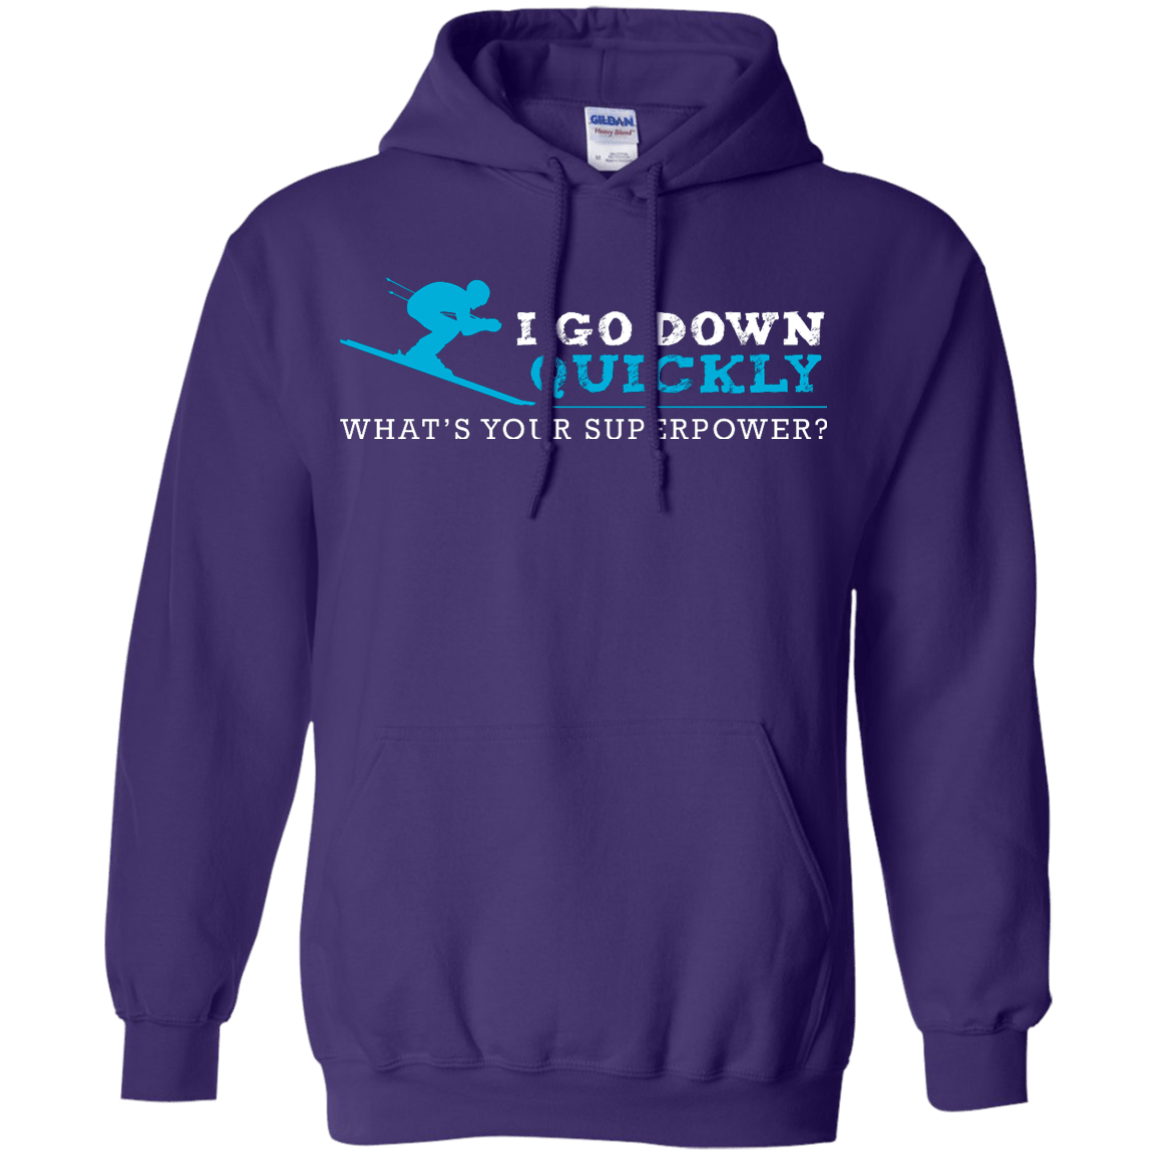 I Go Down Quickly What's Your Superpower -Skiing Hoodies - Powderaddicts